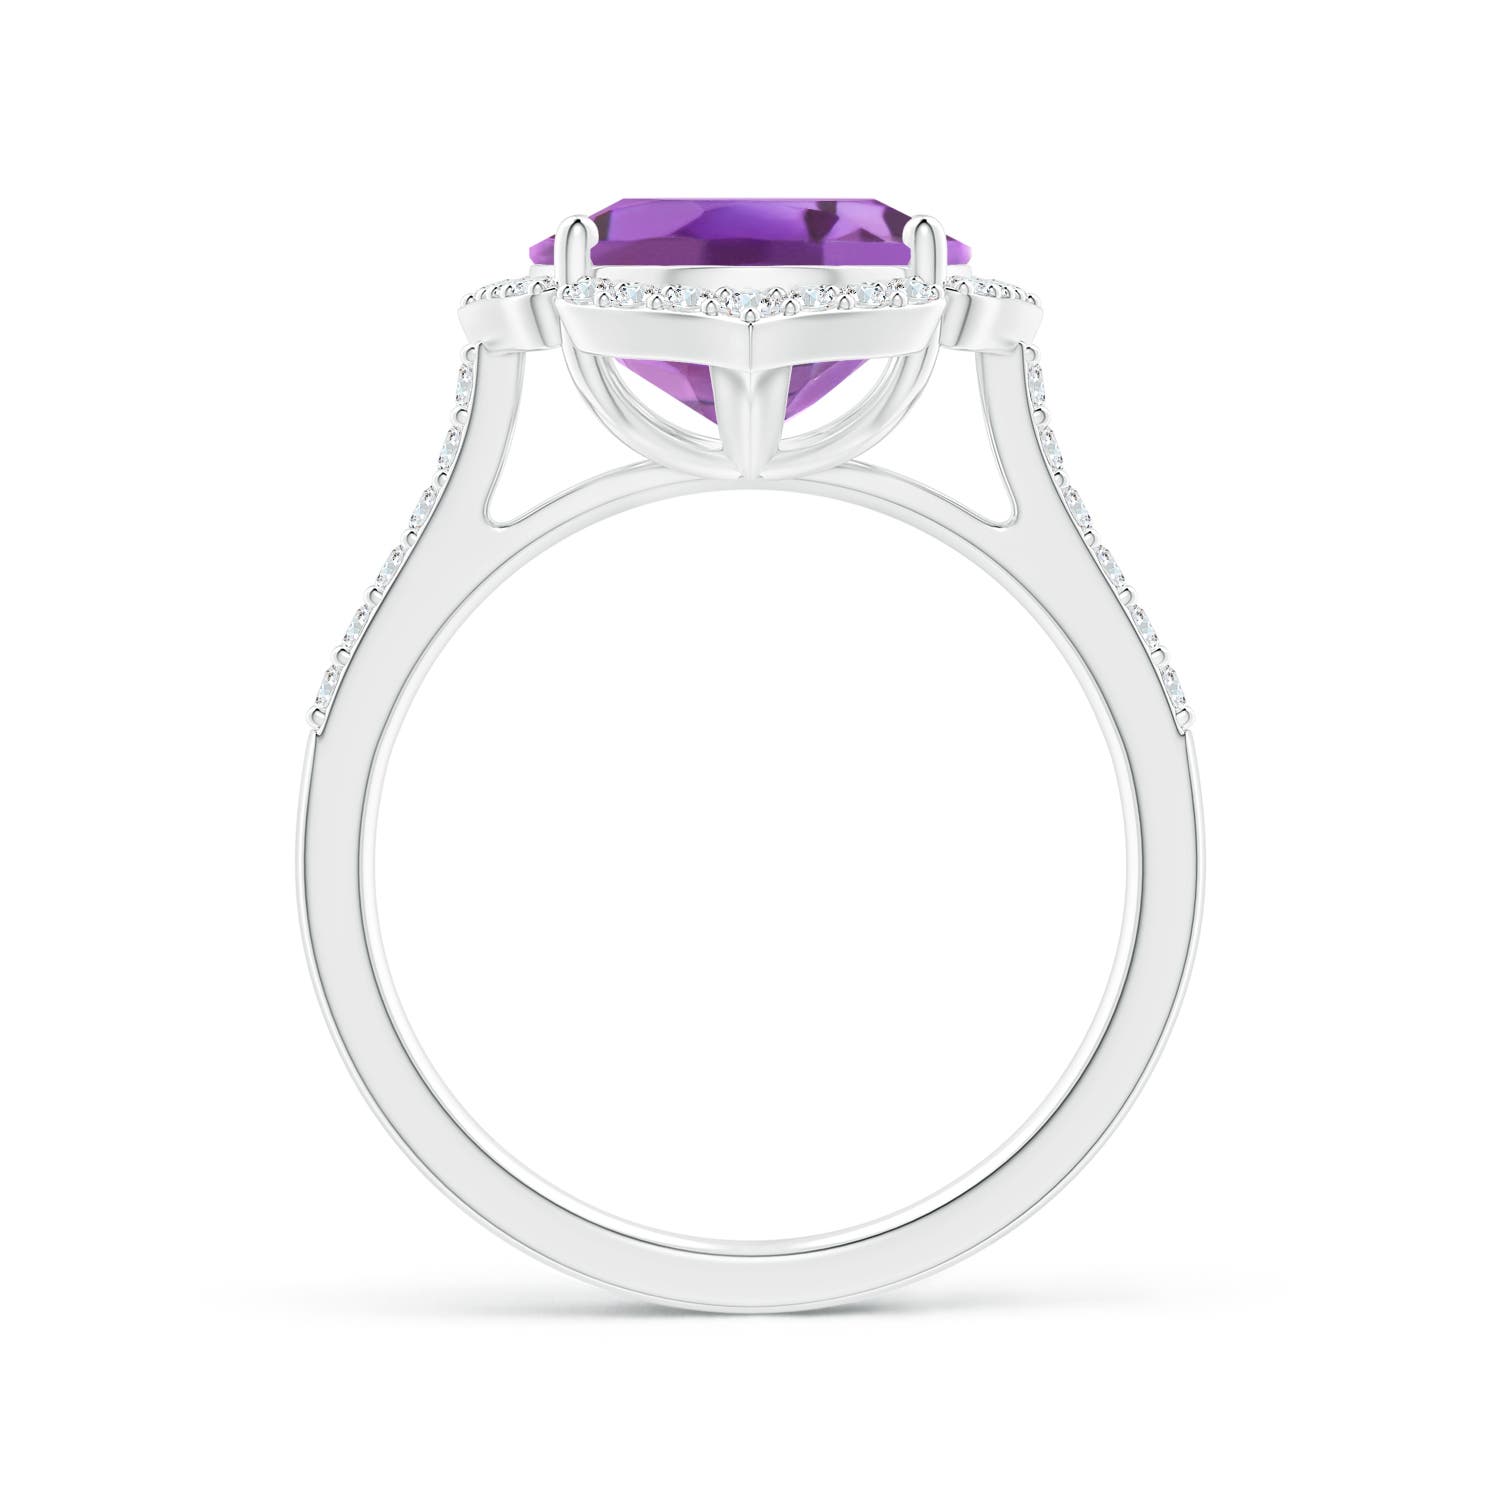 A - Amethyst / 4.59 CT / 14 KT White Gold